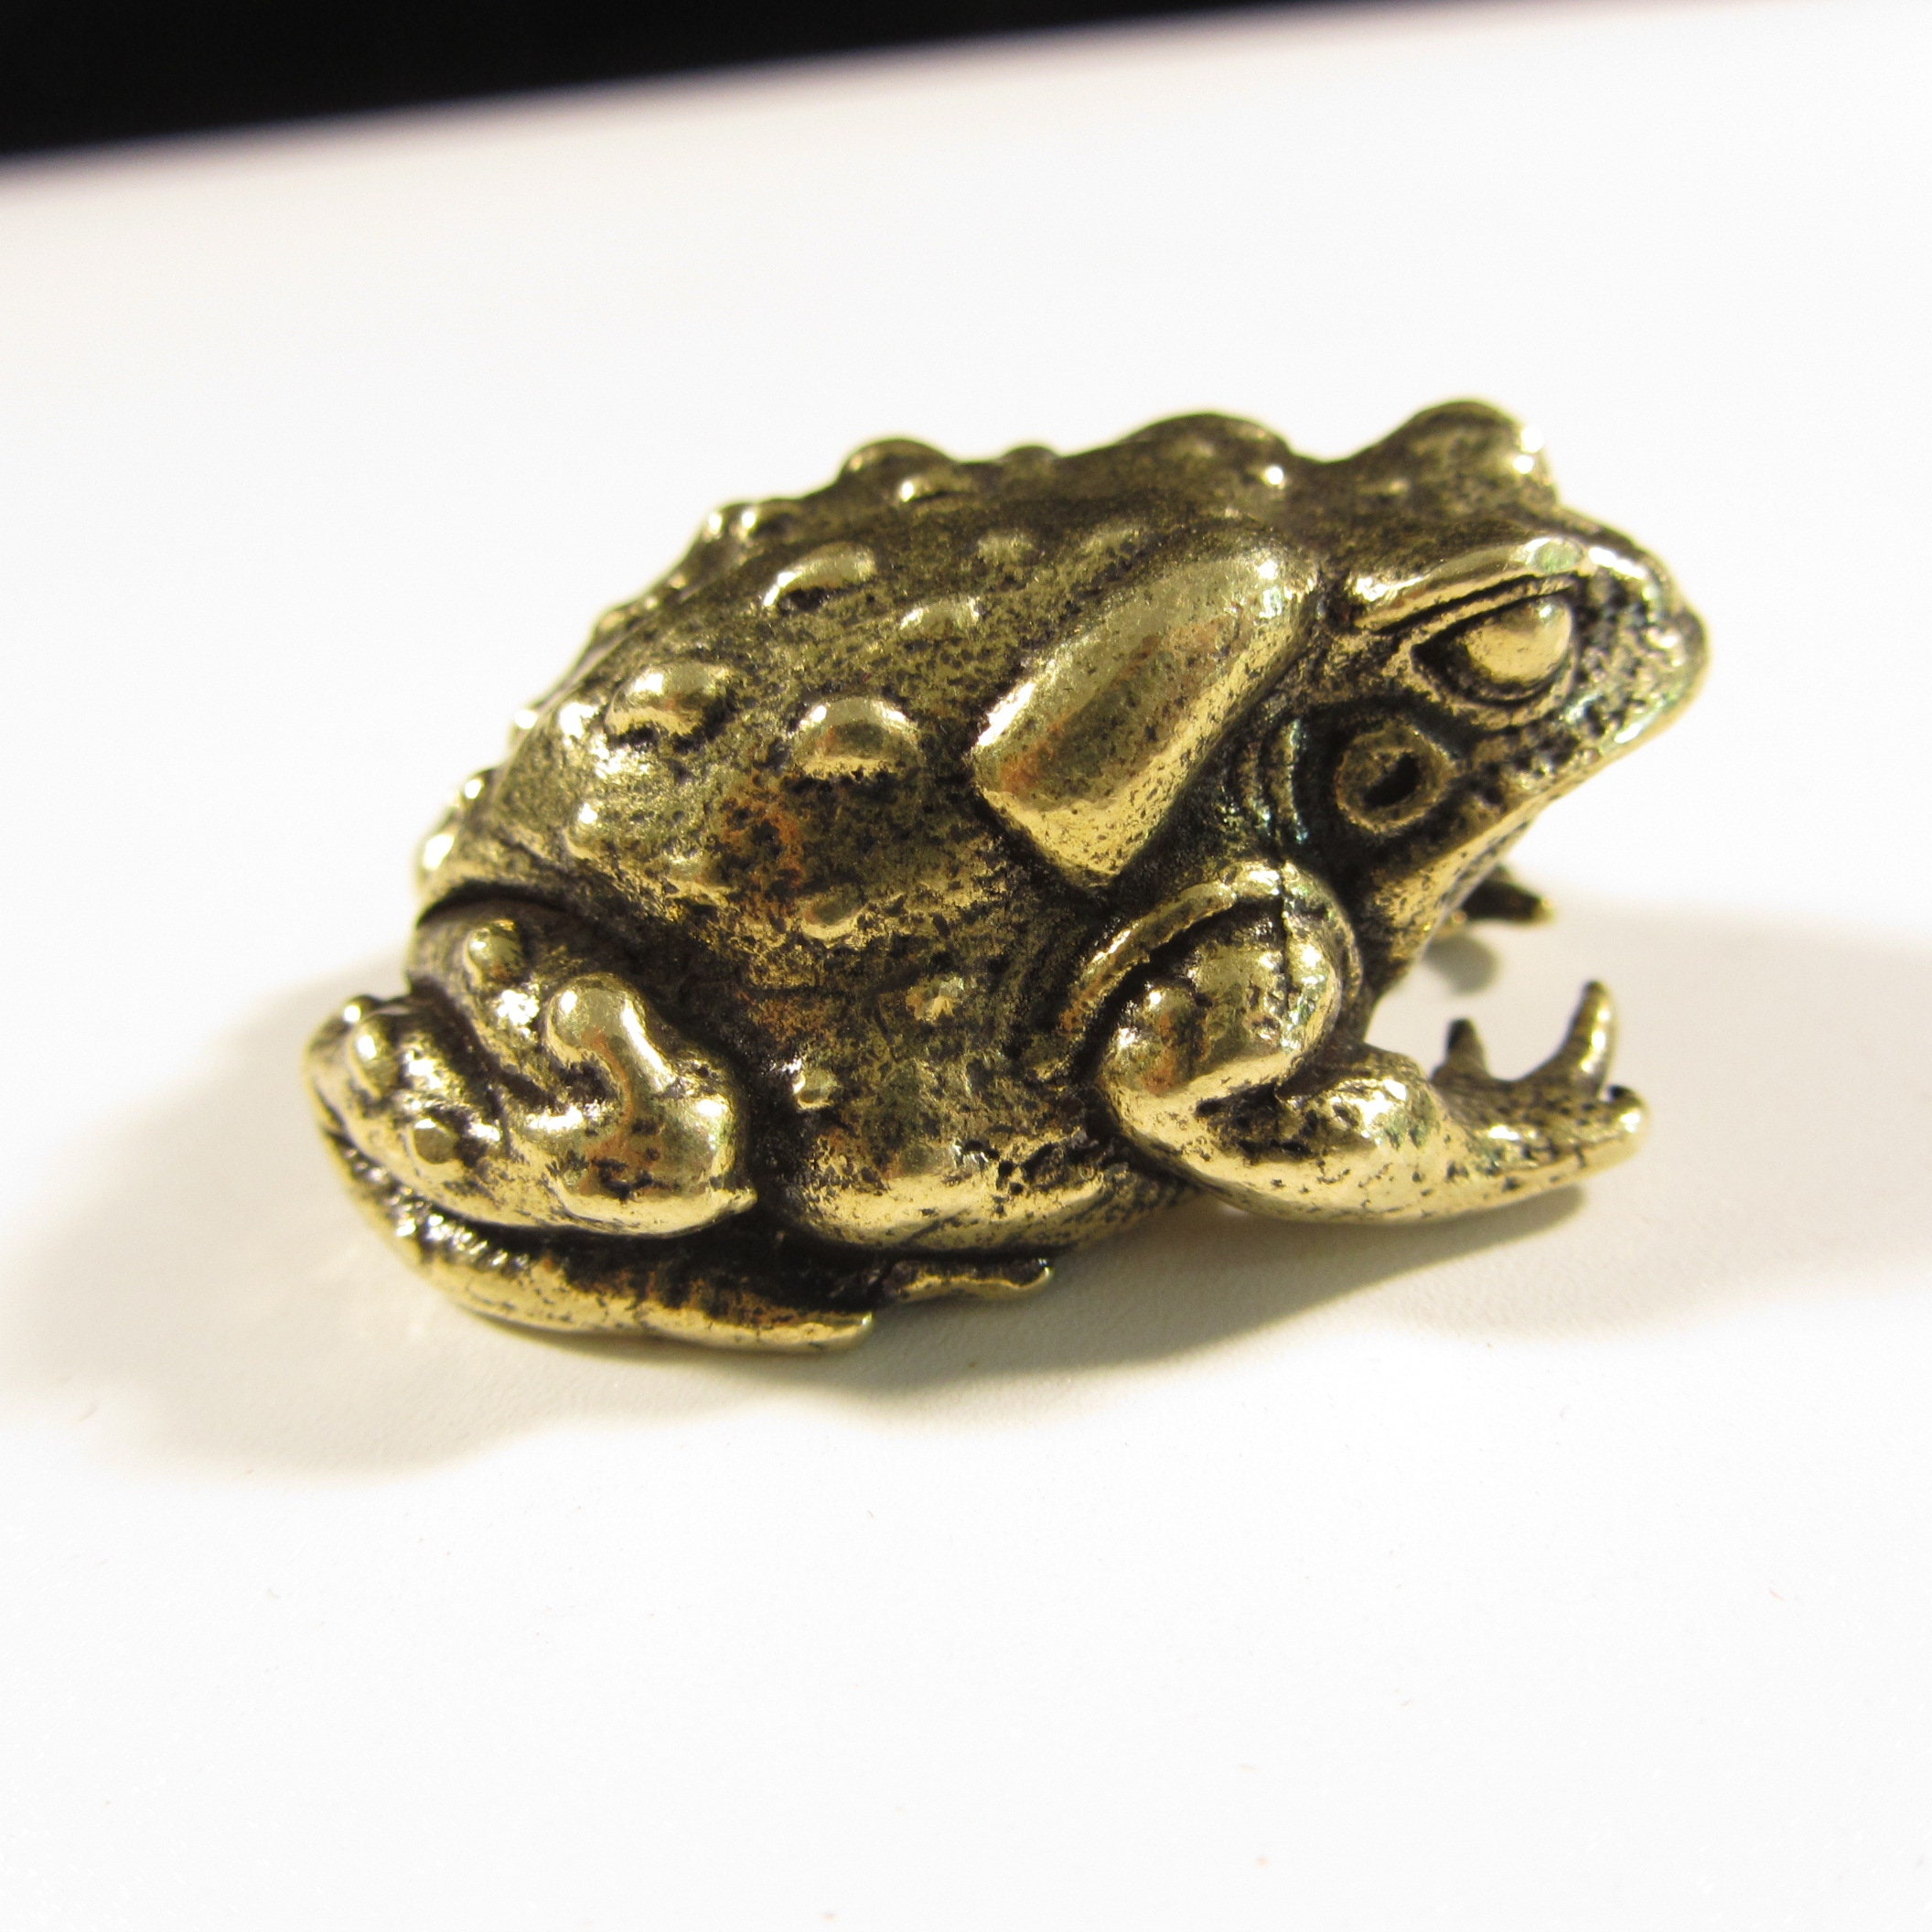 Antique Pure Brass Tortoise on Back of Frog Miniature Figurine Home Decor Gift